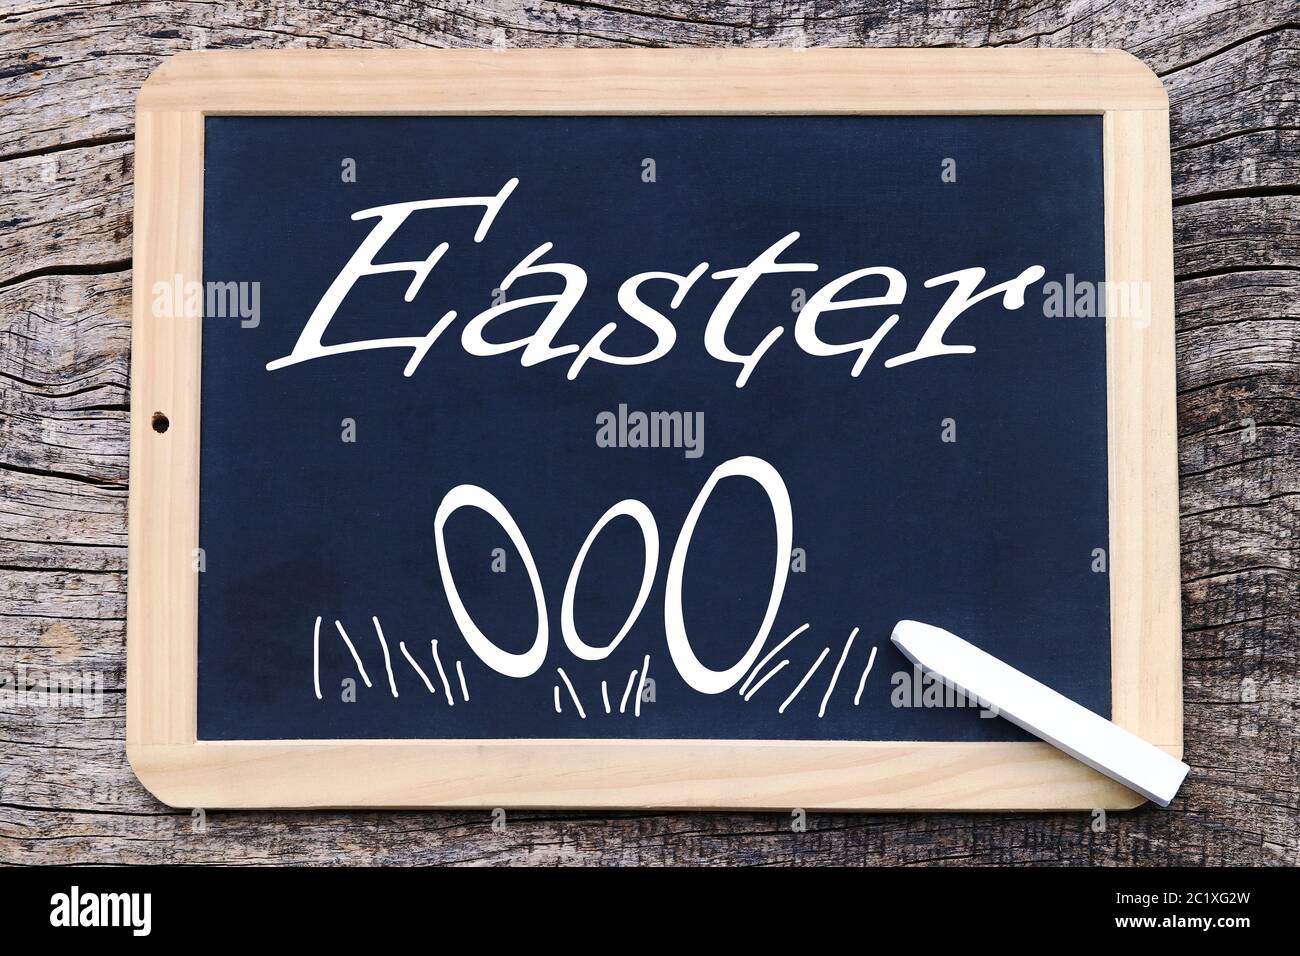 Easter and Easter eggs written and painted on a blackboard Stock Photo